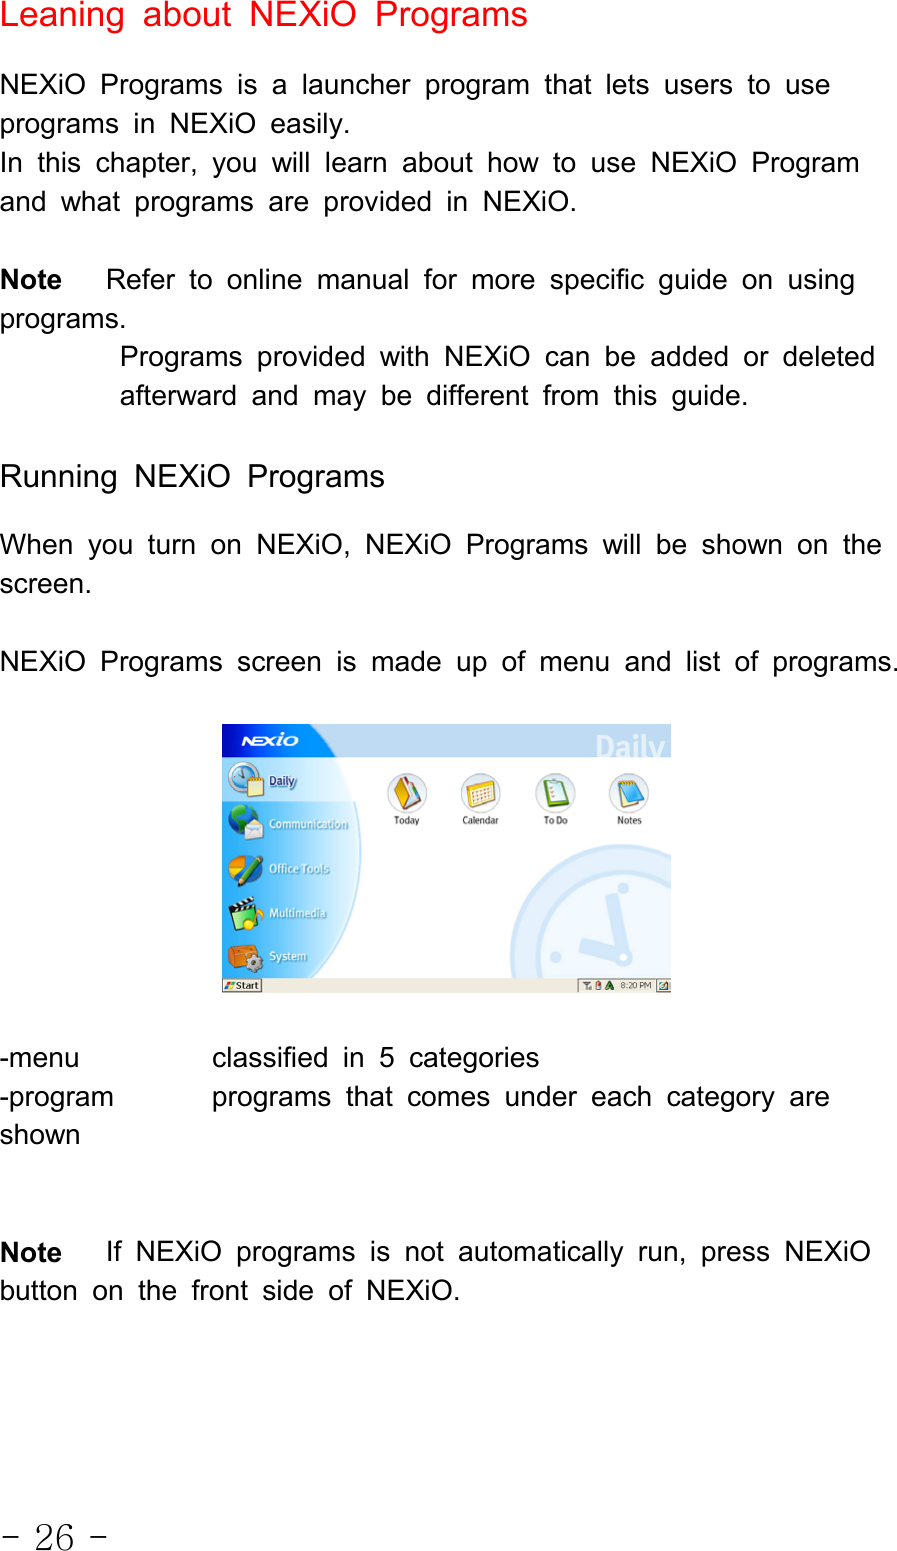 - 26 -Leaning about NEXiO ProgramsNEXiO Programs is a launcher program that lets users to useprograms in NEXiO easily.In this chapter, you will learn about how to use NEXiO Programand what programs are provided in NEXiO.Note Refer to online manual for more specific guide on usingprograms.Programs provided with NEXiO can be added or deletedafterward and may be different from this guide.Running NEXiO ProgramsWhen you turn on NEXiO, NEXiO Programs will be shown on thescreen.NEXiO Programs screen is made up of menu and list of programs.-menu classified in 5 categories-program programs that comes under each category areshownNote If NEXiO programs is not automatically run, press NEXiObutton on the front side of NEXiO.